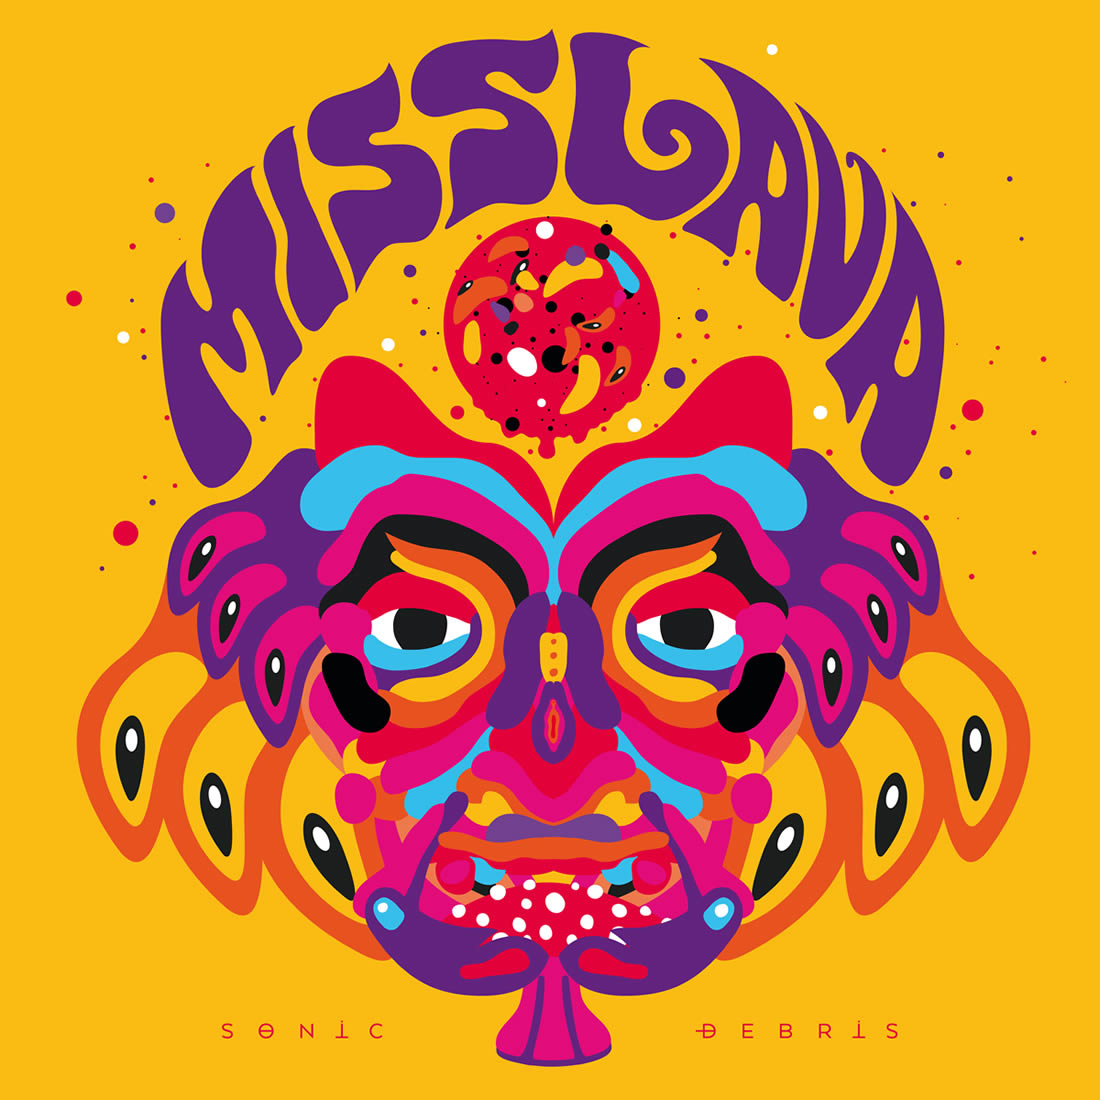 Miss Lava – “The Silent Ghost of Doom”